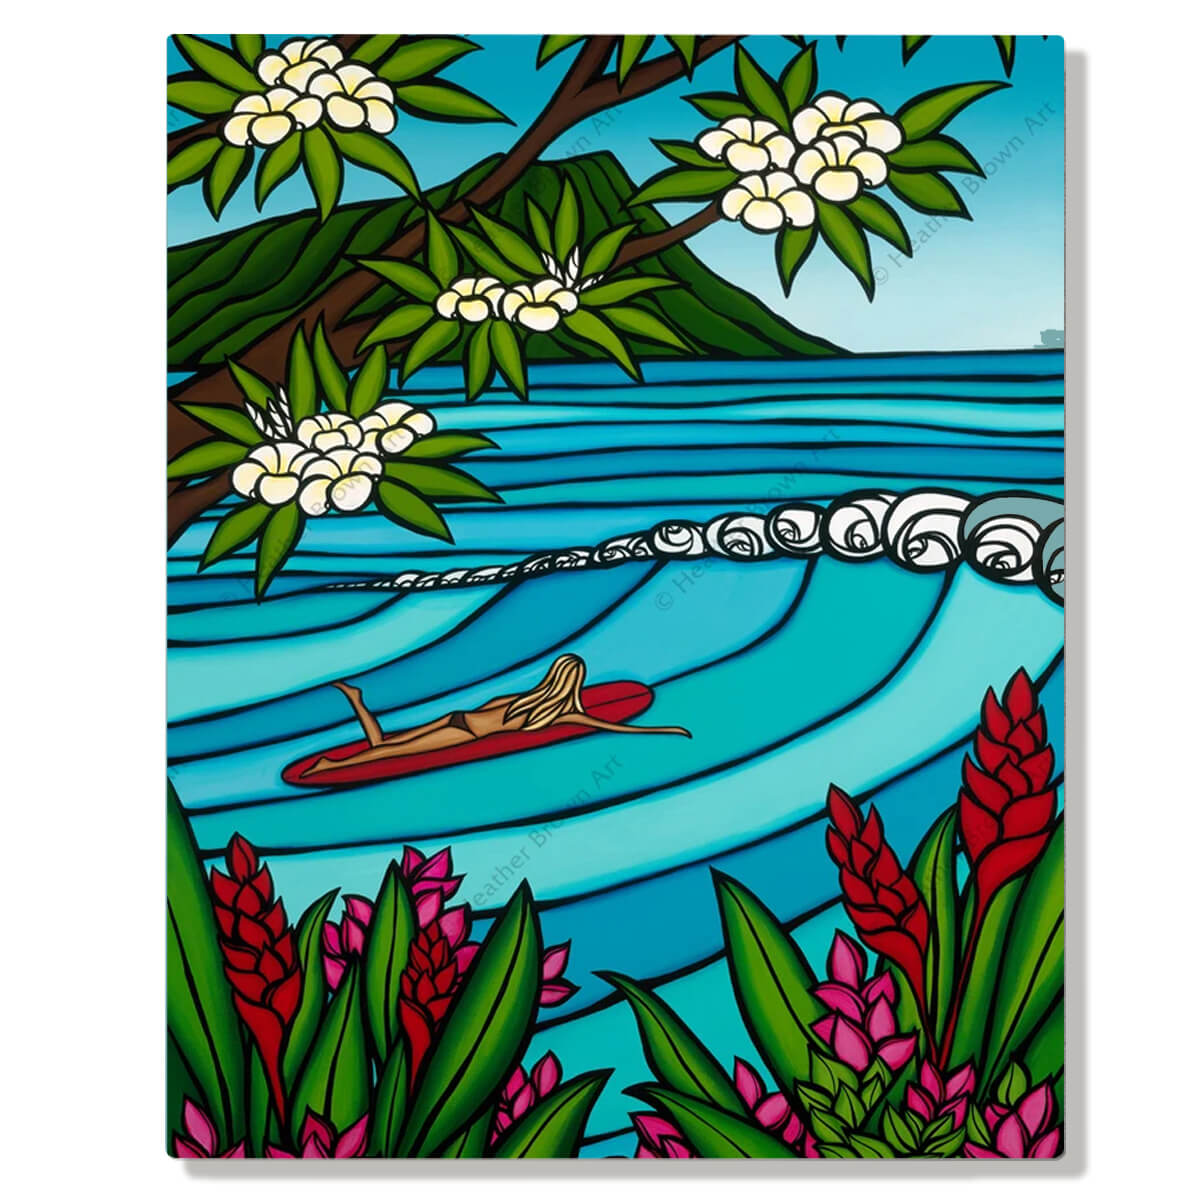 A metal art print featuring tropical flowers, Diamond Head landscape, and a surfer girl is heading out on the gorgeous blue Waikiki Beach waves by Hawaii artist Heather Brown